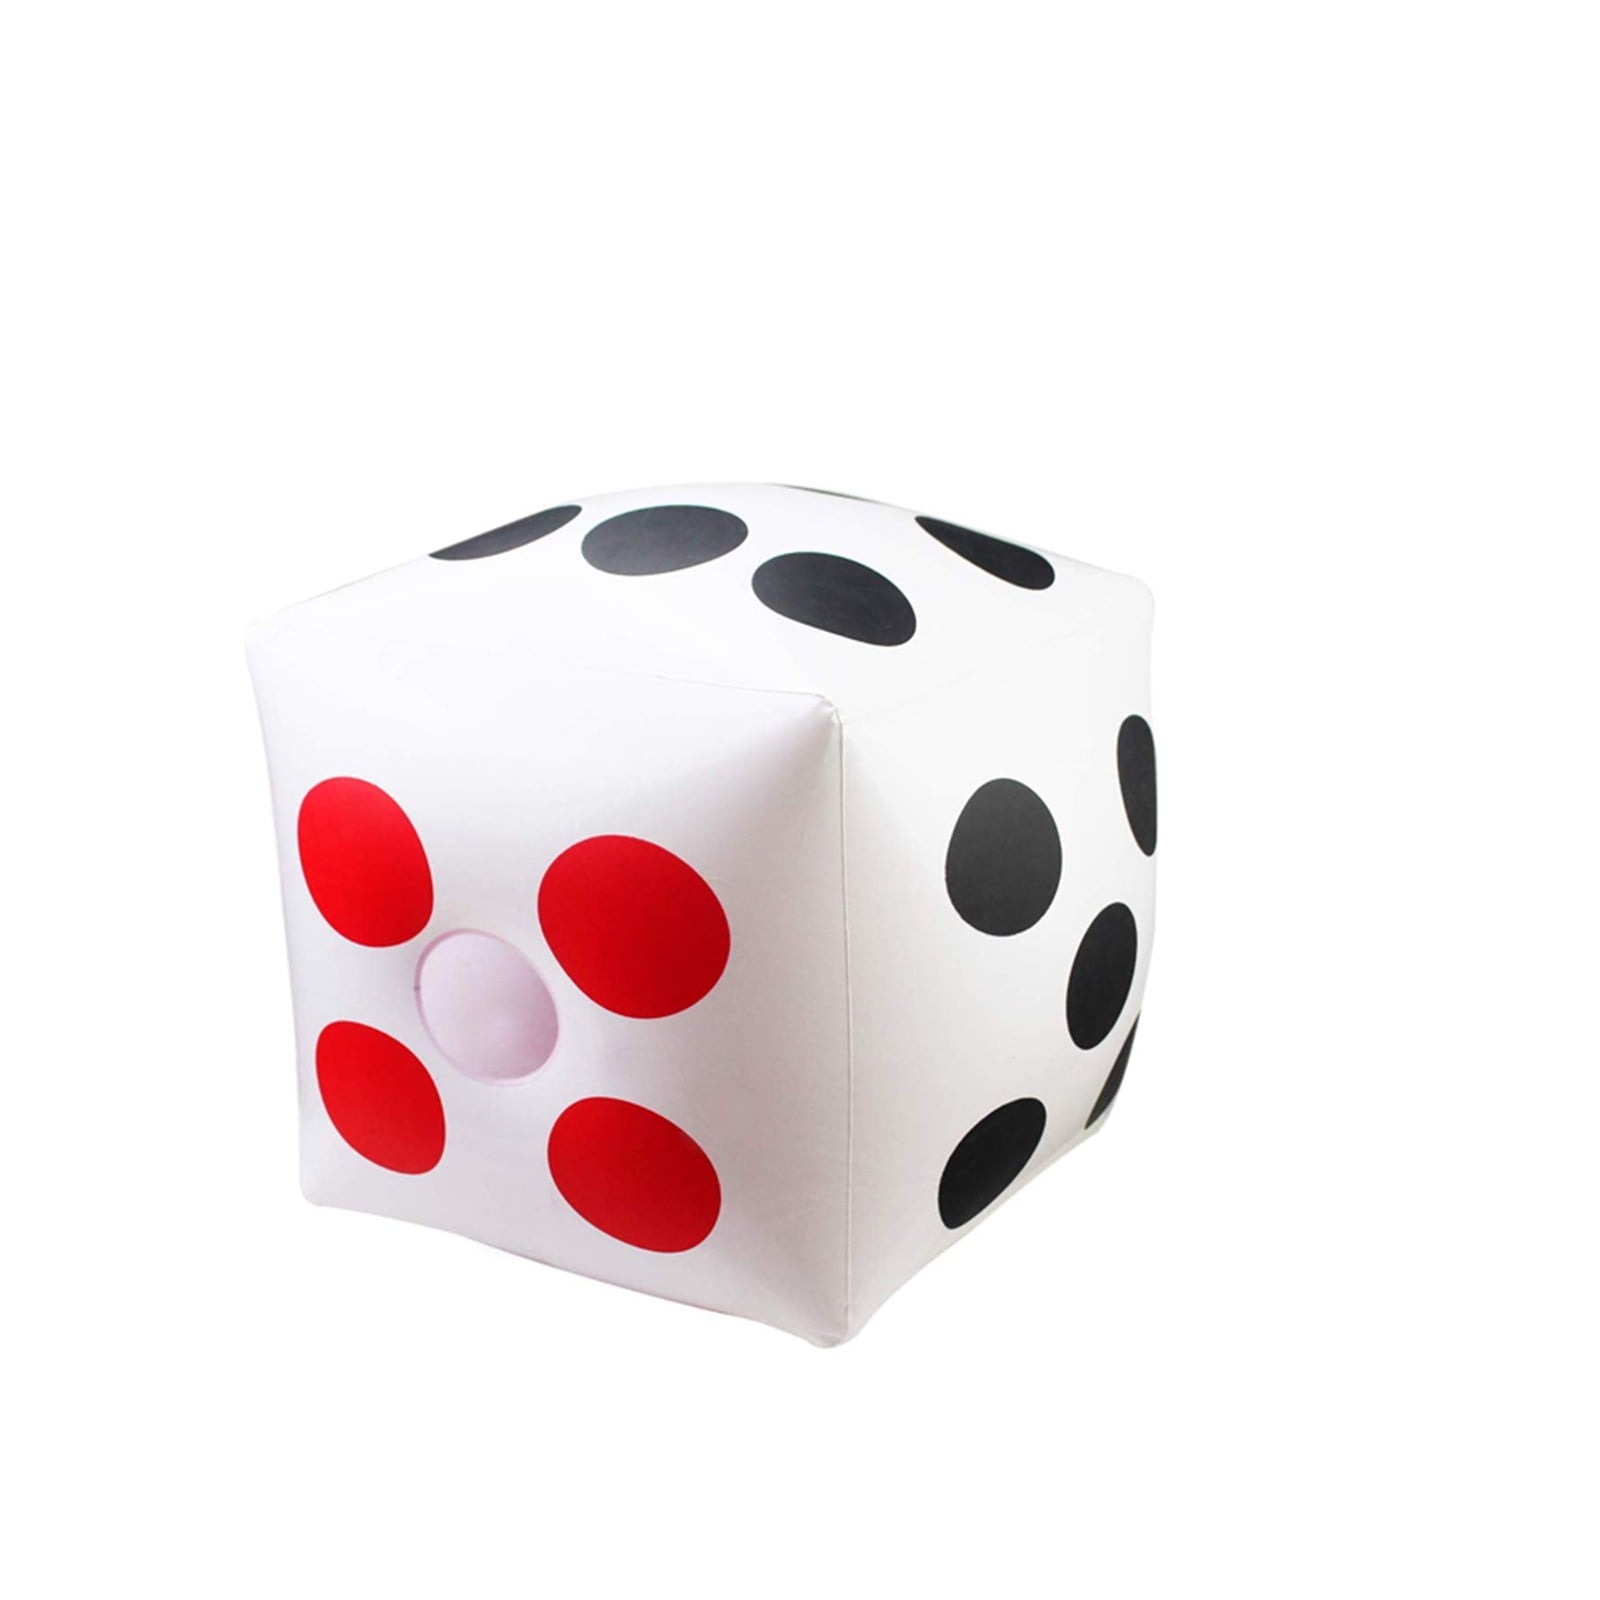 12 Asst Color Jumbo Foam Playing Dice 2 1/2" Favors for sale online 